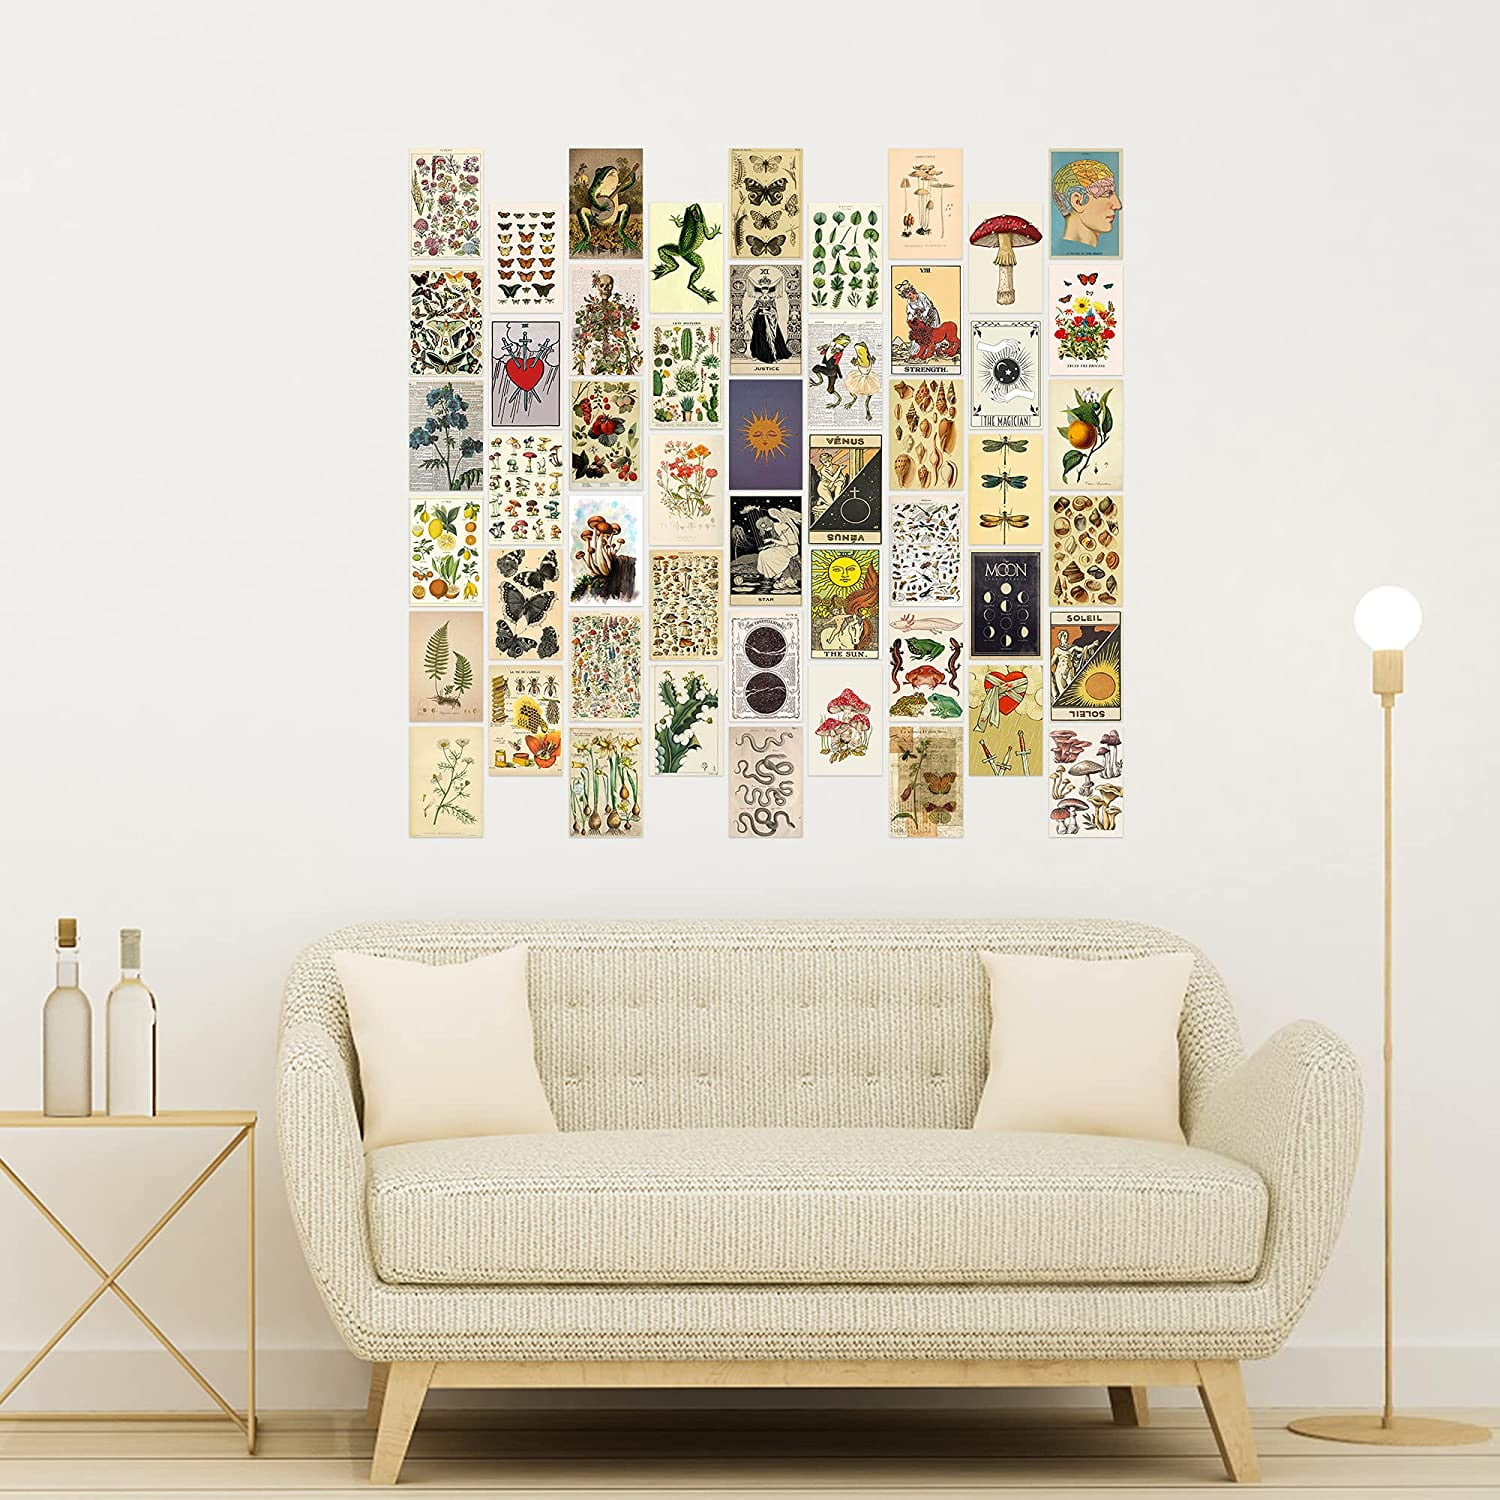 Vintage Style Art Print Photo Collection Trendy Small Poster for Dorm 50PCS Vintage Botanical Illustration Tarot Aesthetic Pictures Wall Collage Kit Bedroom Decor for Teens Boys Girls 